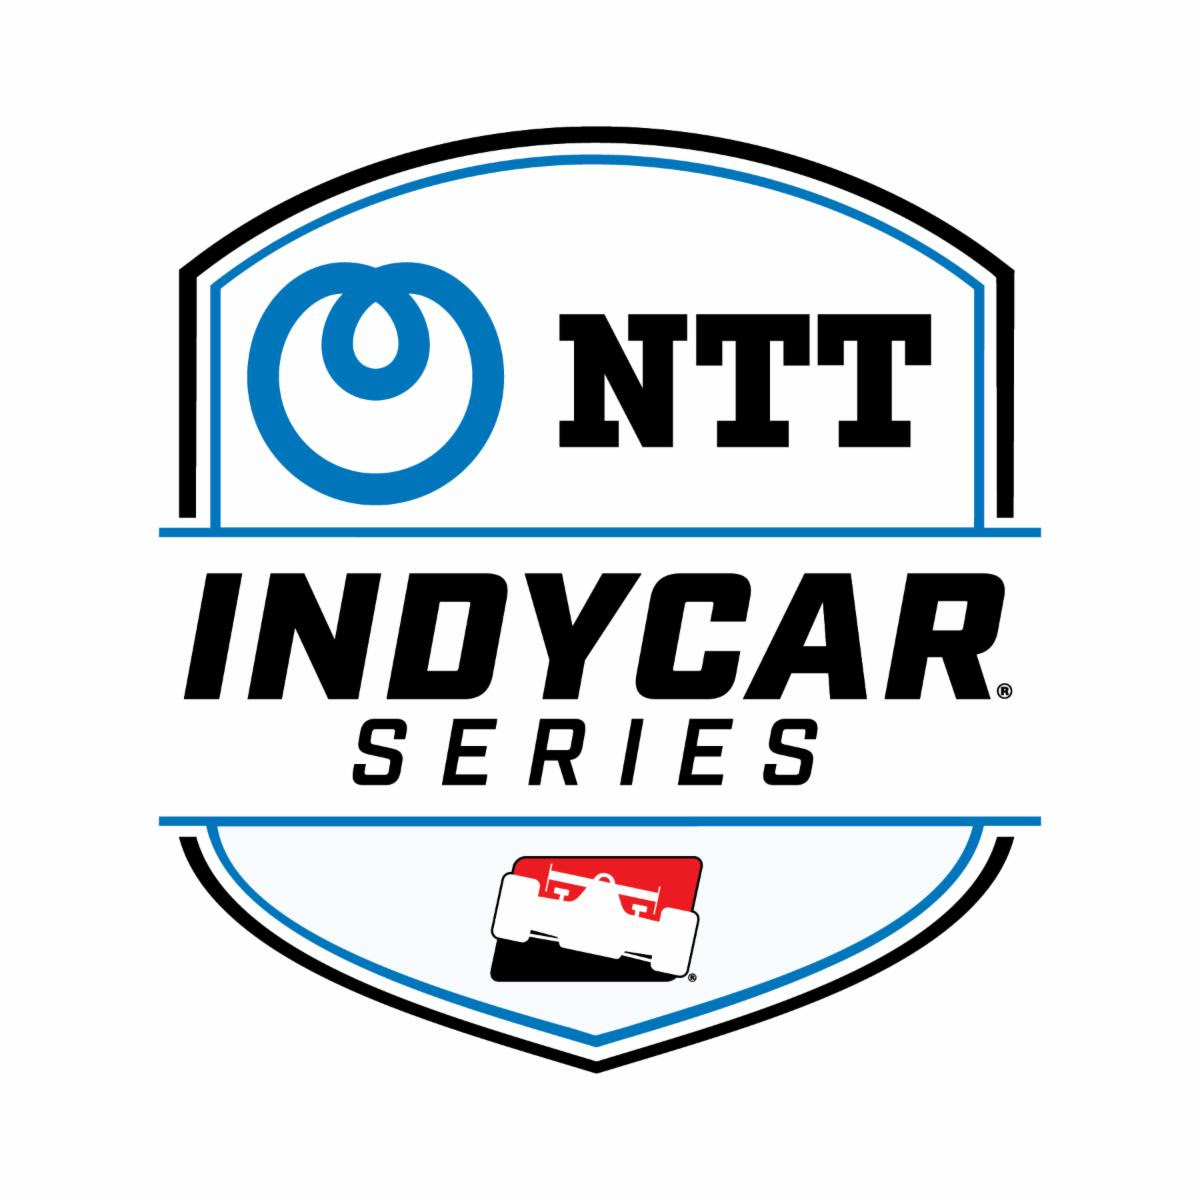 CHEVY NTT INDYCAR SERIES GMR INDY GP: Simon Pagenaud and Conor Daly Press Conference Transcript